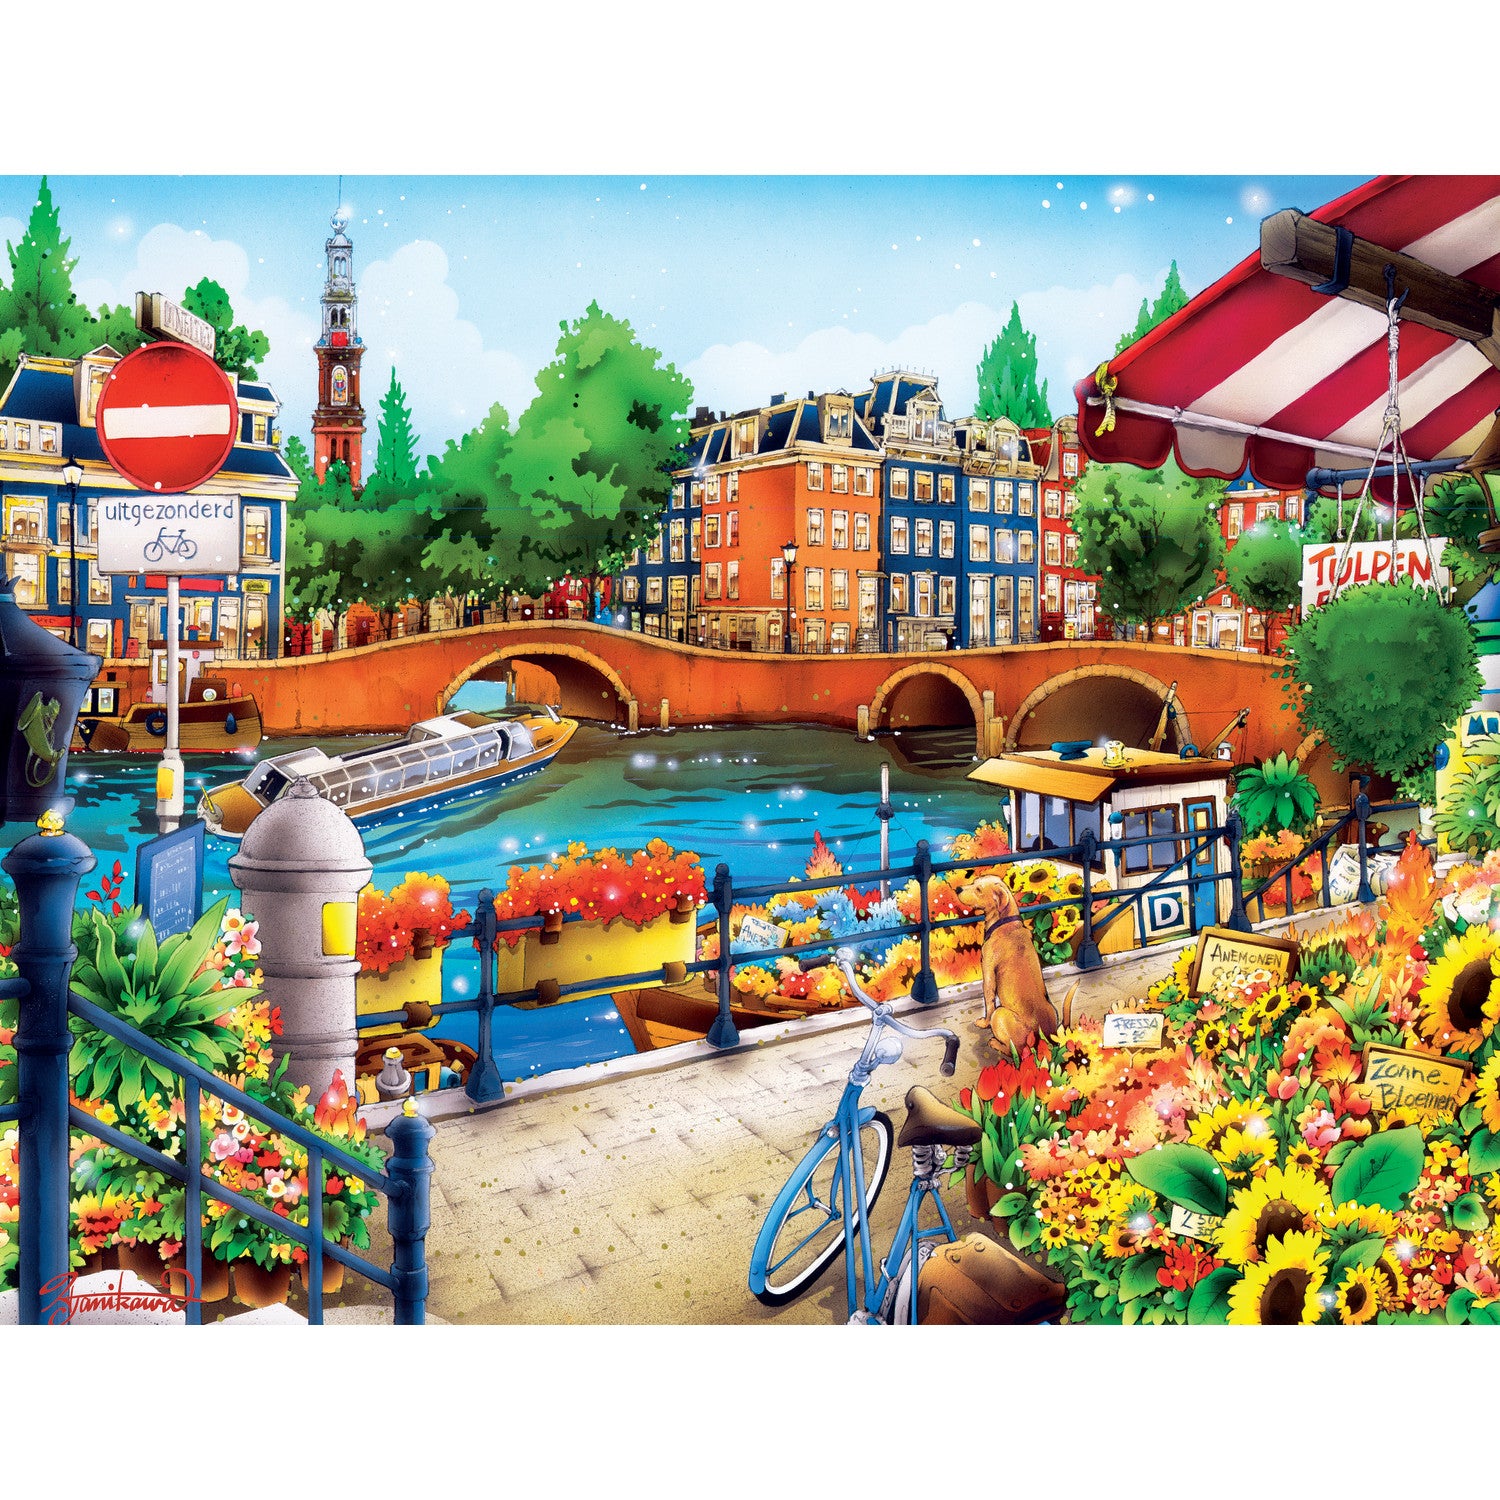 Artist Gallery V2 12-Pack Puzzle Assortment